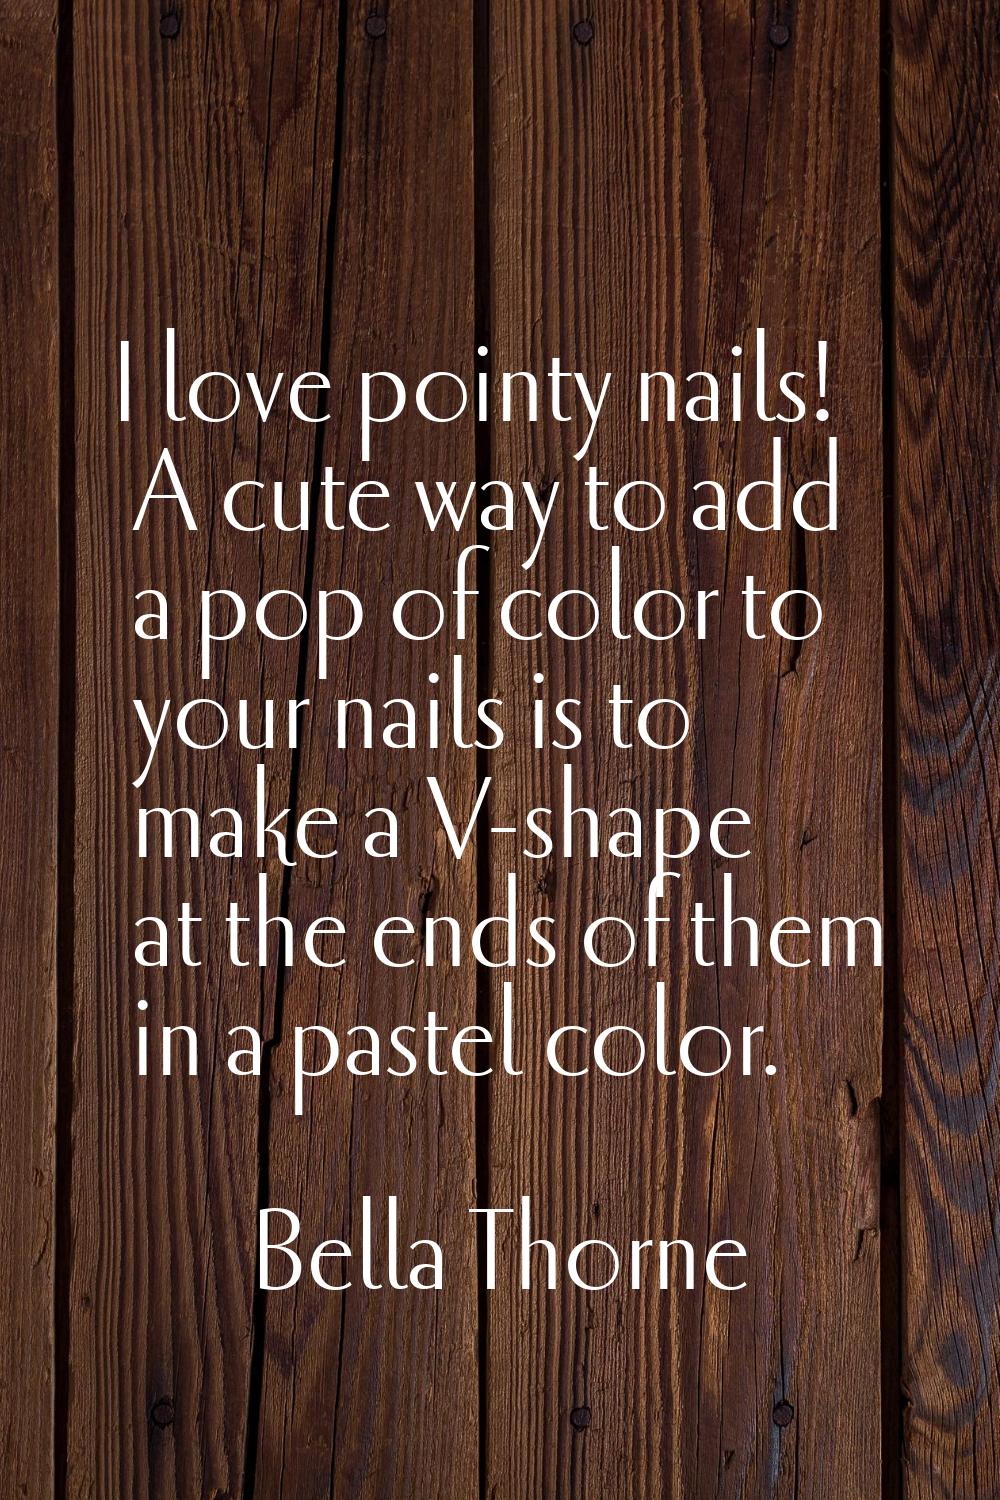 I love pointy nails! A cute way to add a pop of color to your nails is to make a V-shape at the end